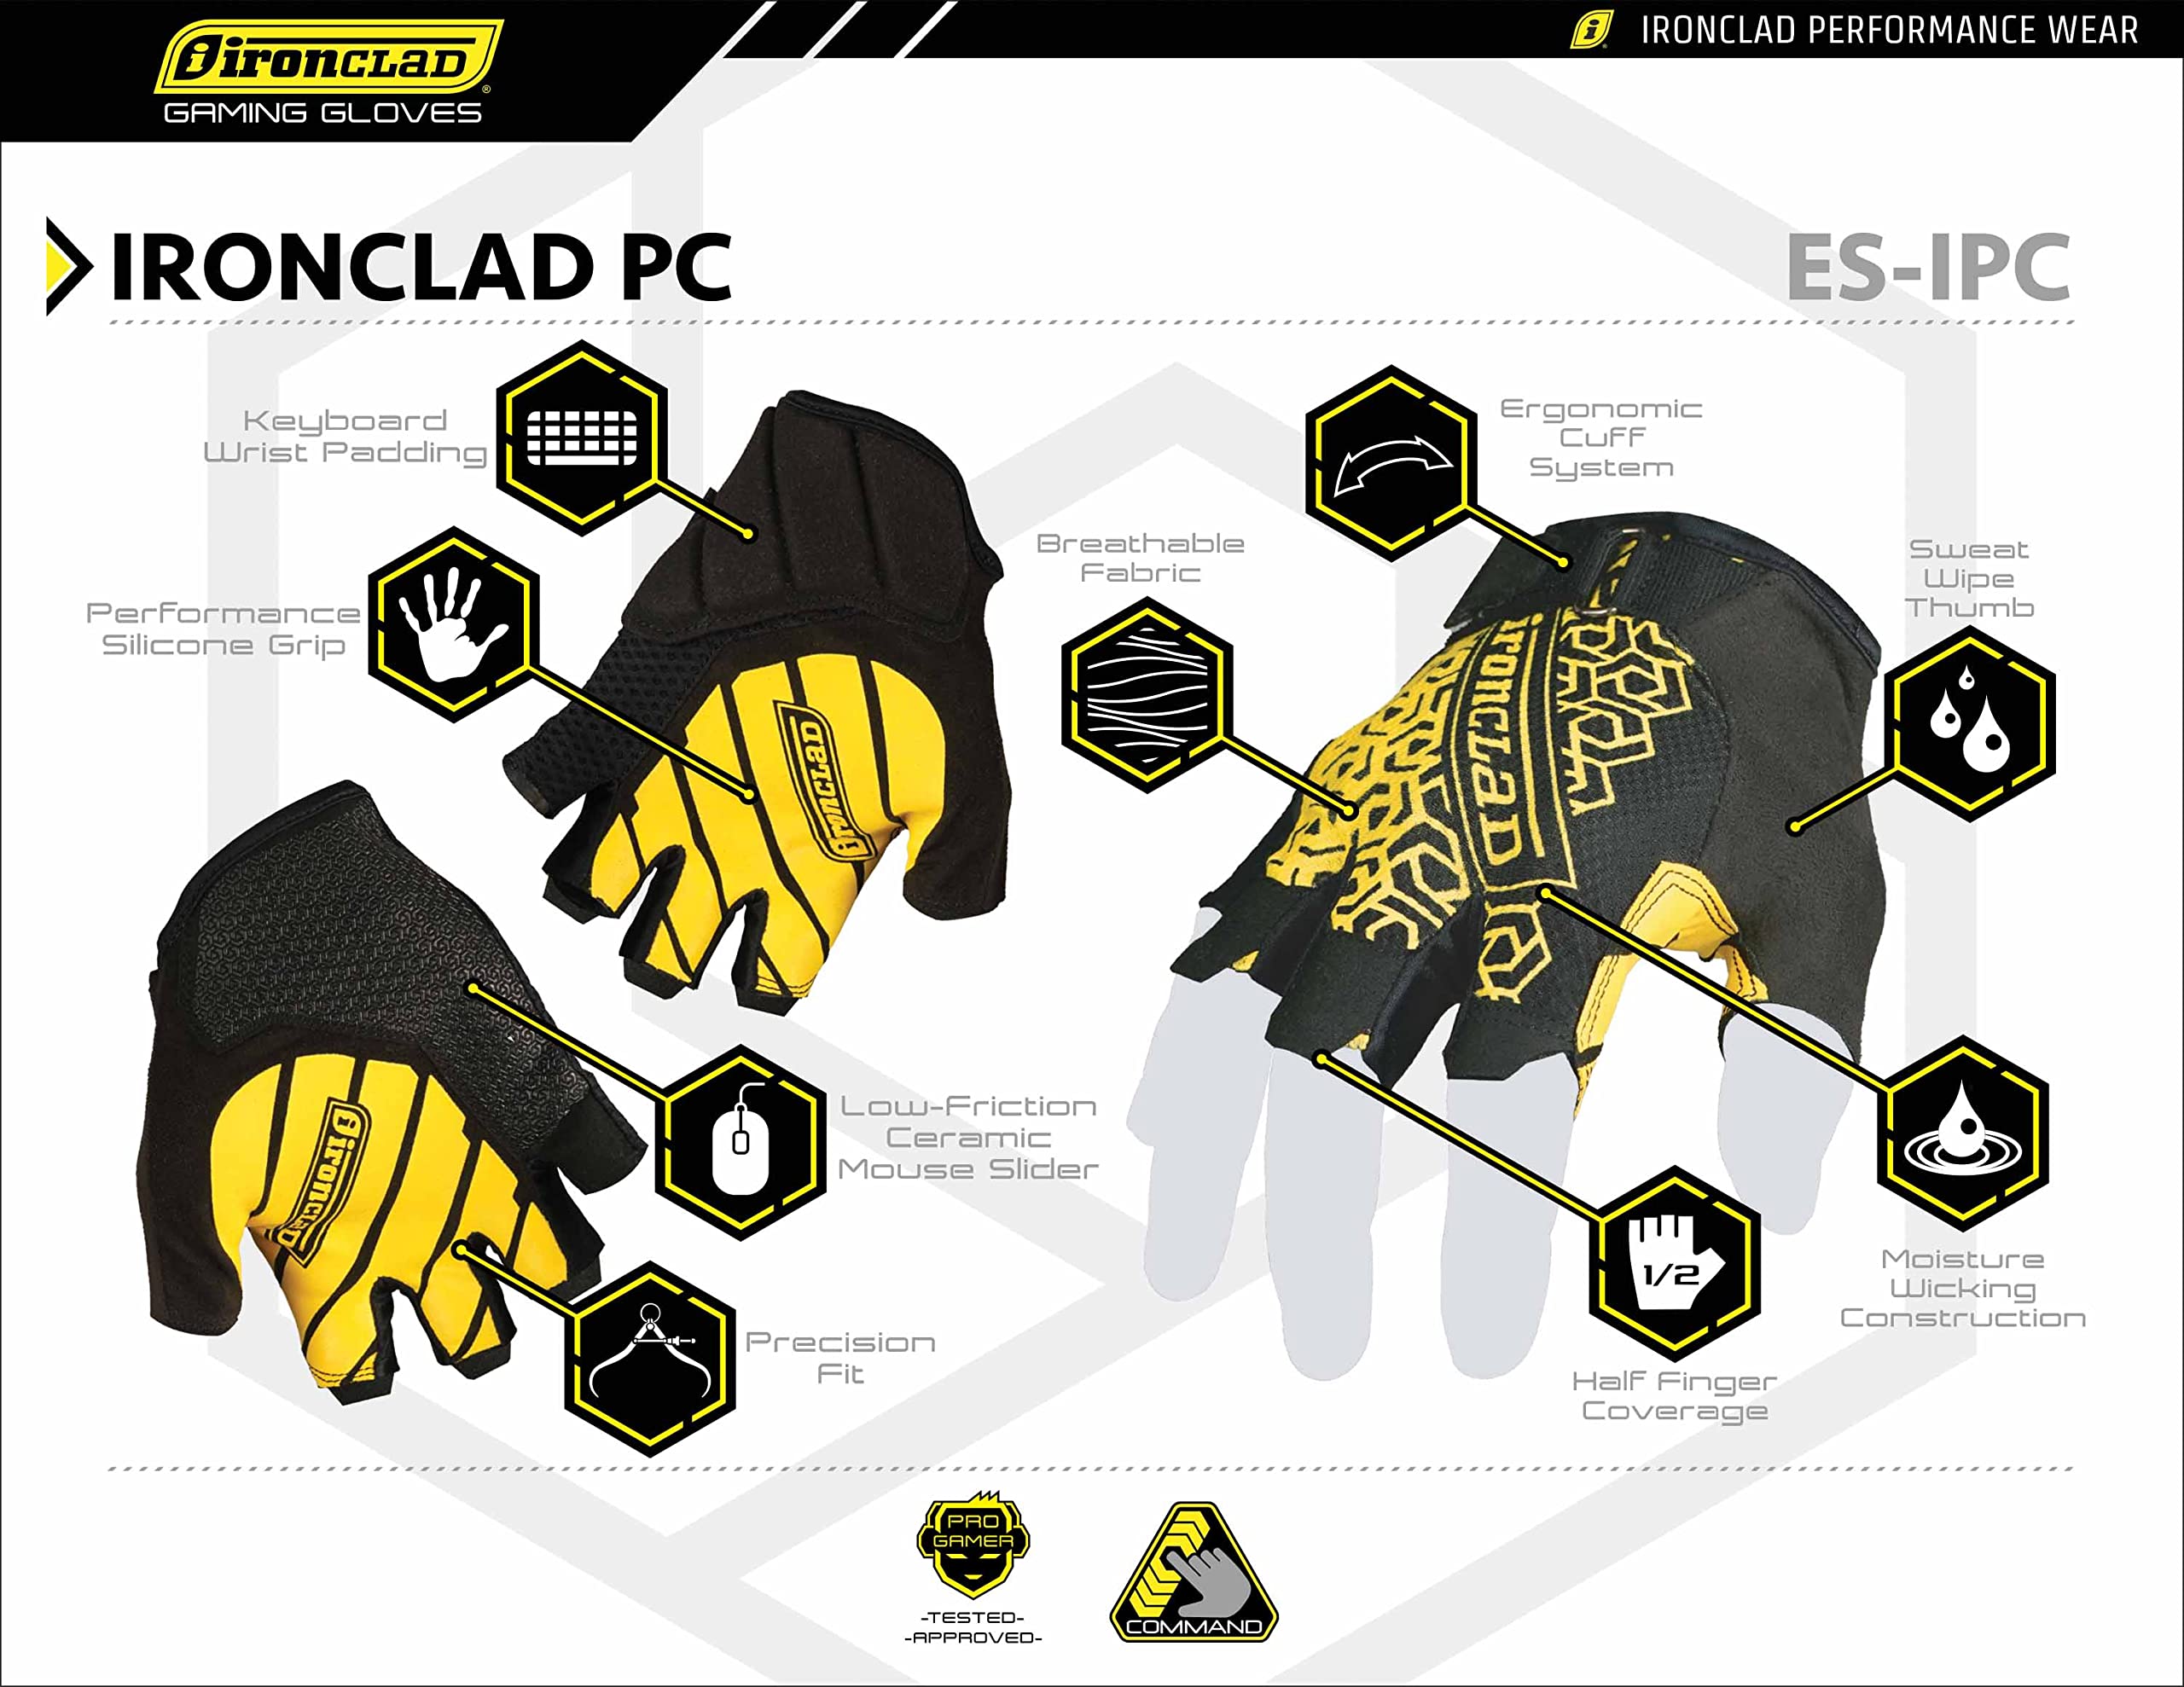 Ironclad PC Gaming Gloves, Precision Fit, Performance Silicone Grip, Moisture Wicking Construction, 1 Pair, ES-IPC-01-XS